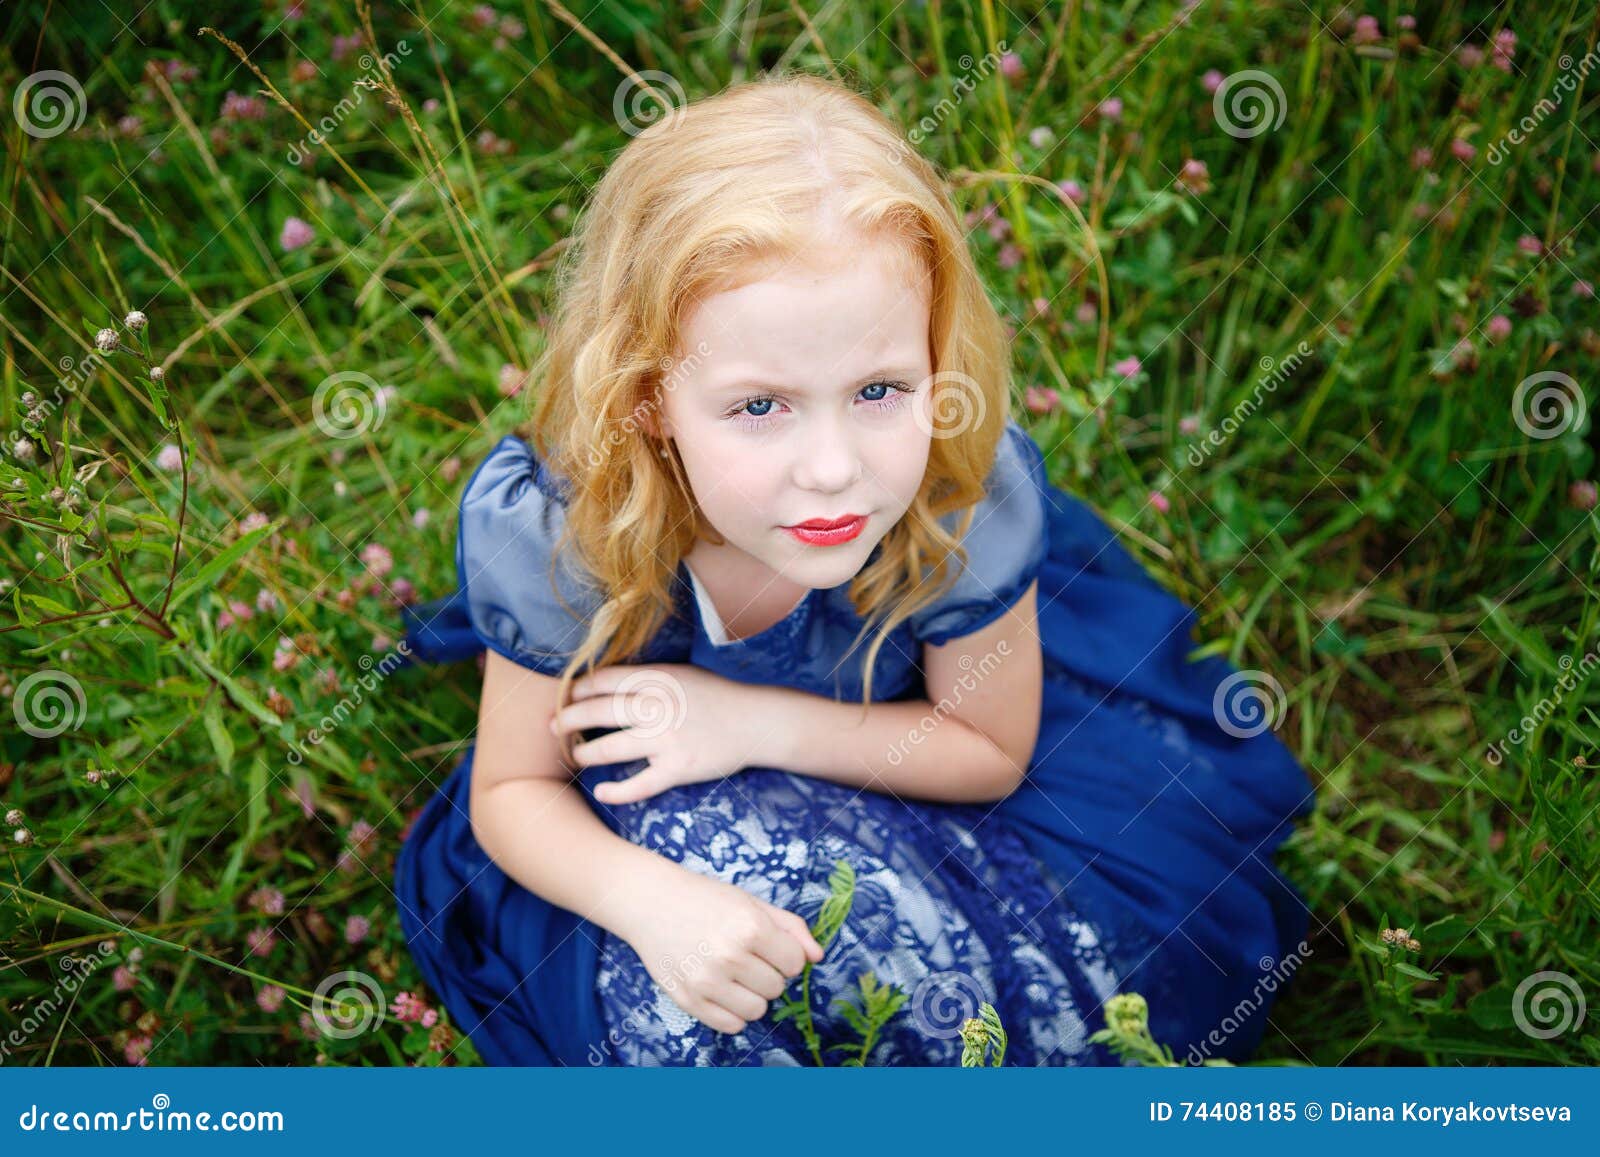 Portrait of Beautiful Little Girl in the Blue Dress Stock Image - Image ...